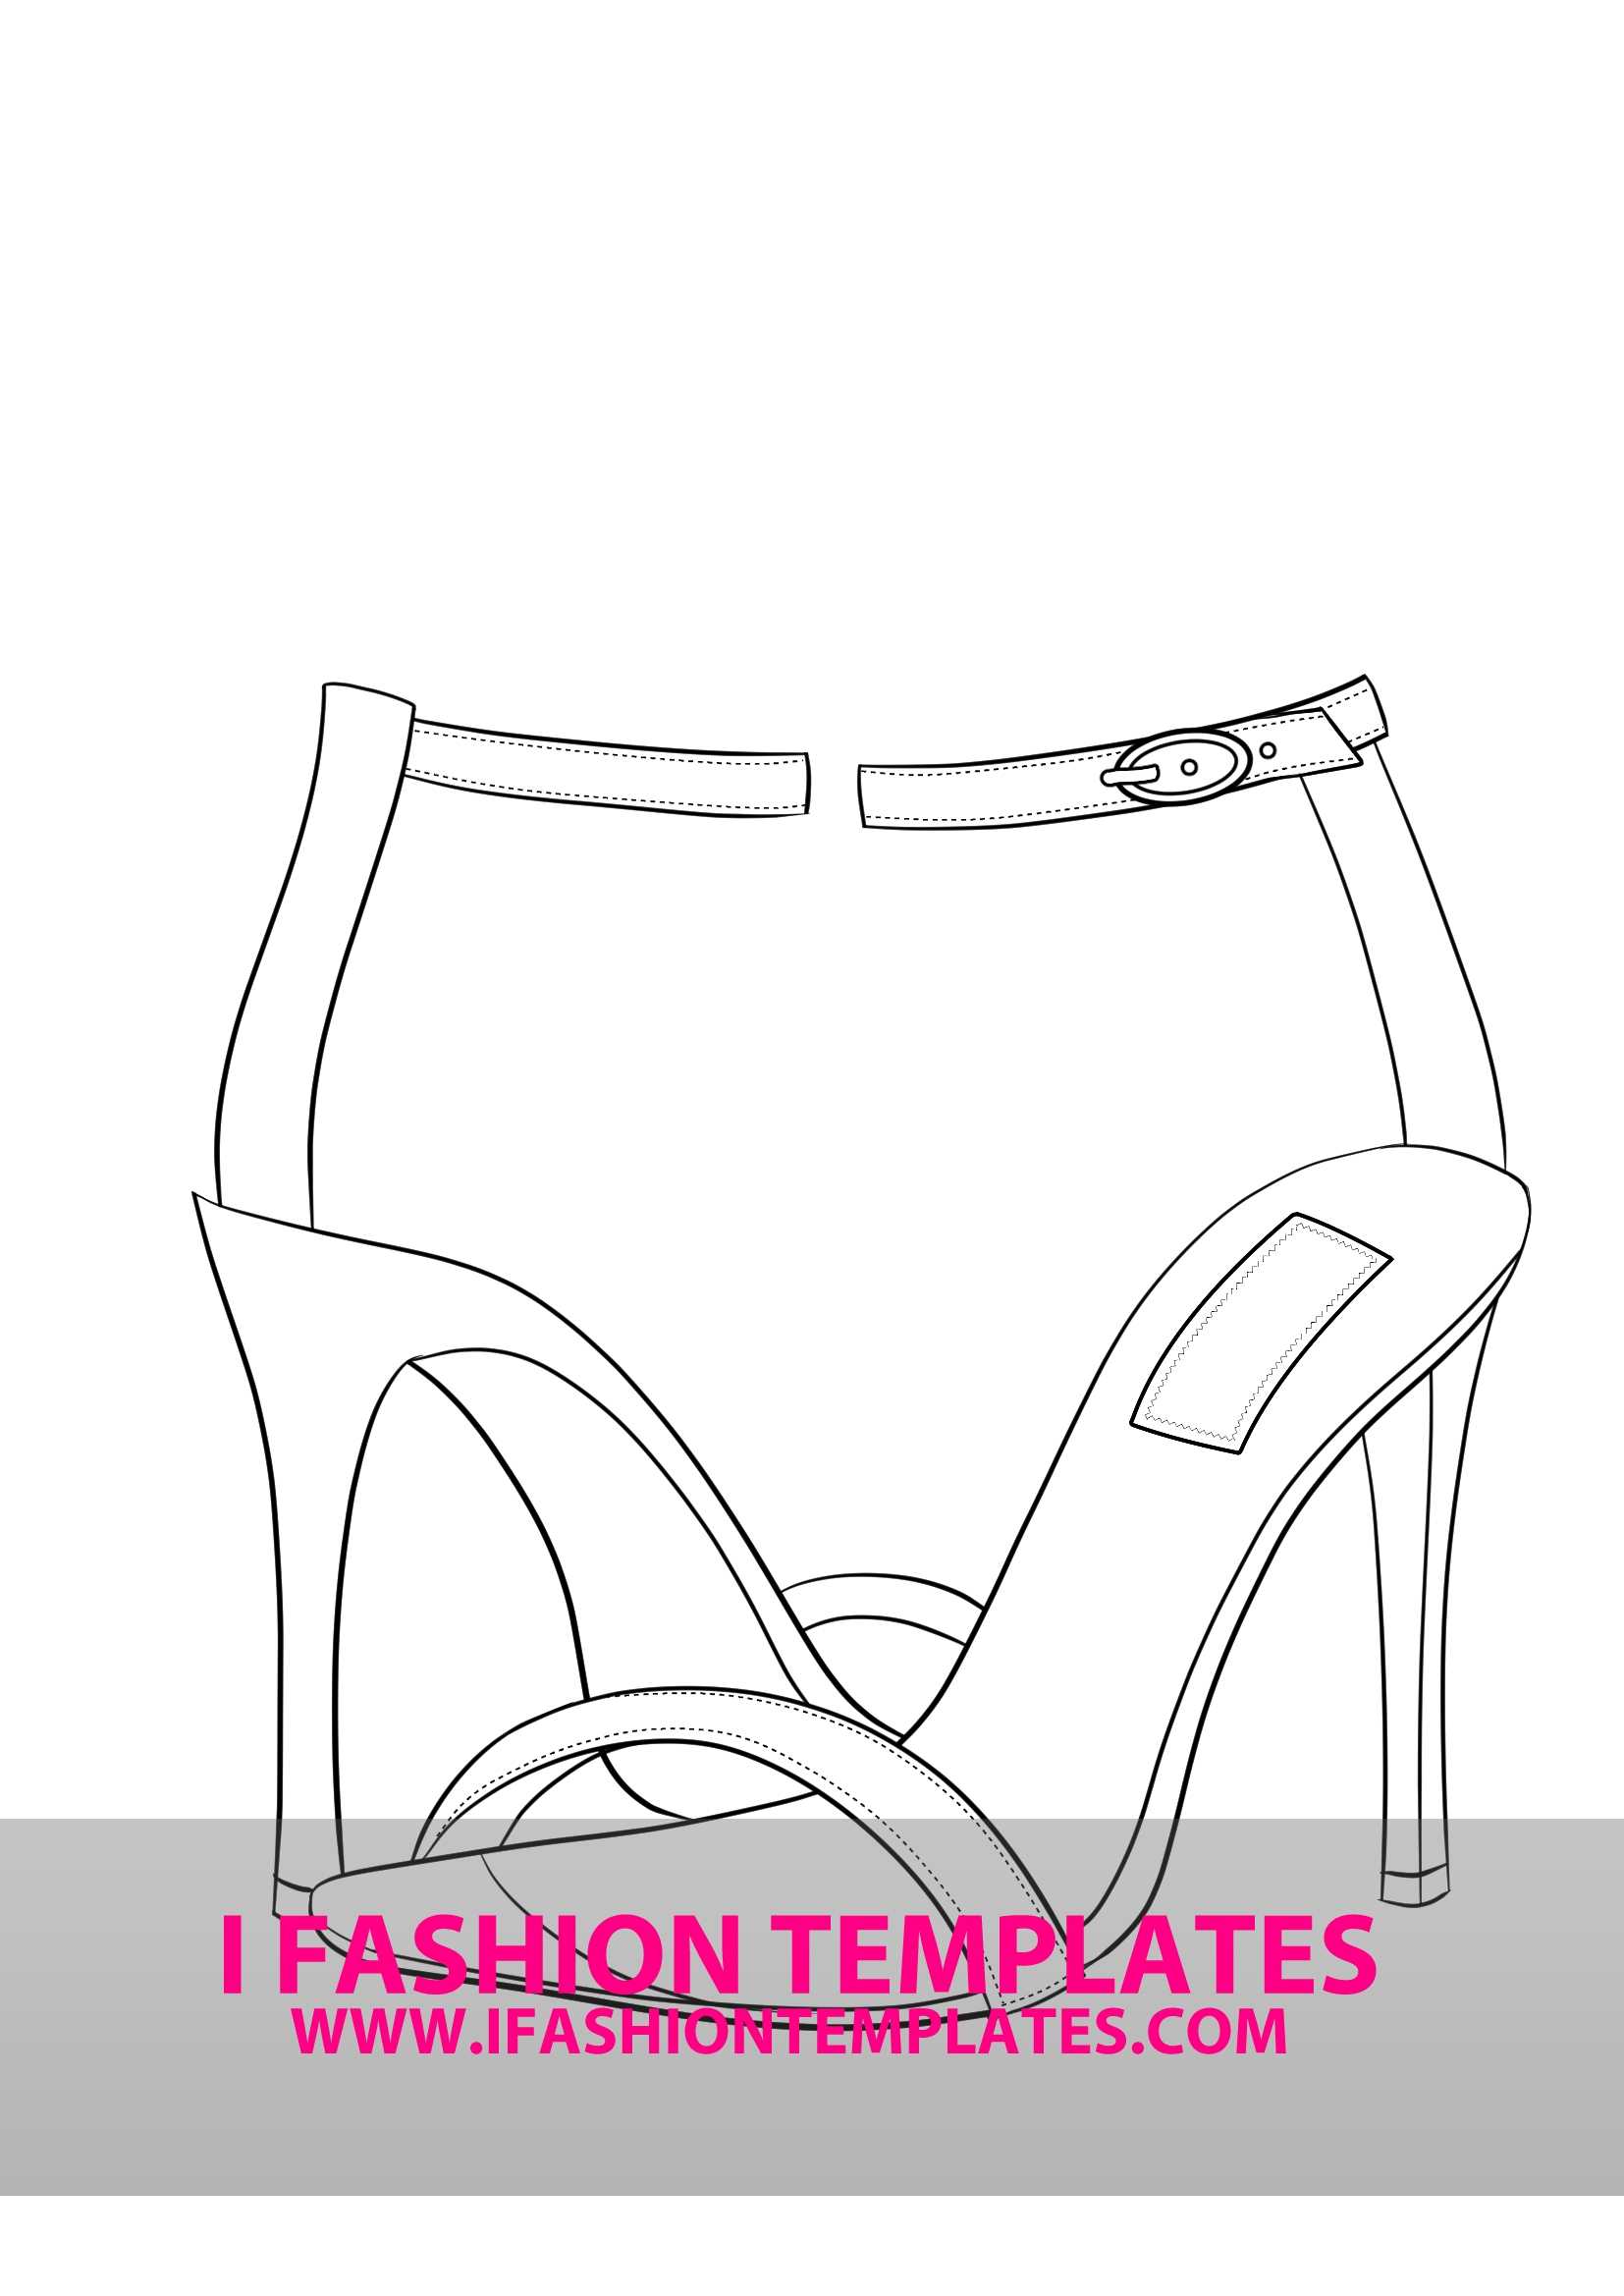 High Heel Drawing Template At Paintingvalley | Explore With Regard To High Heel Shoe Template For Card